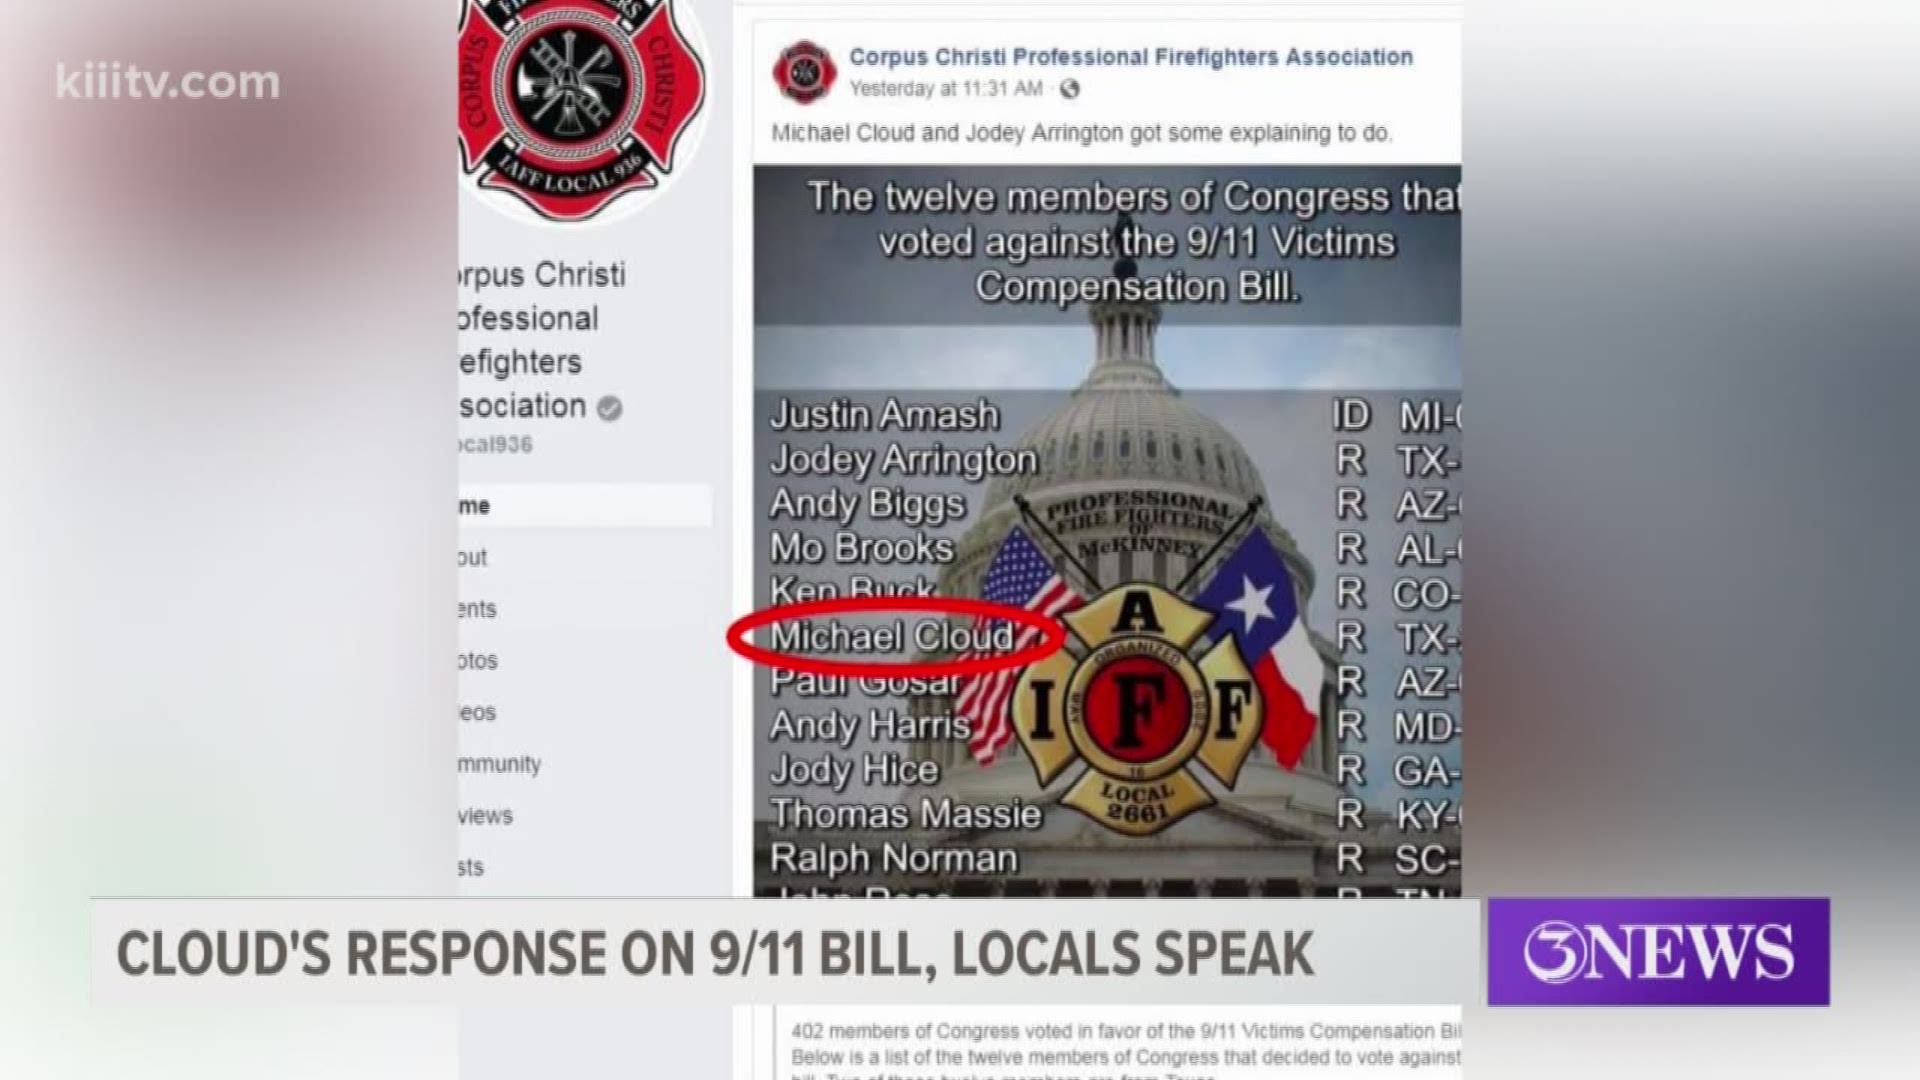 The Corpus Christi Professional Firefighters Association is joining firefighters across the state in questioning a vote by Congressman Michael Cloud concerning 9/11 victims compensation.